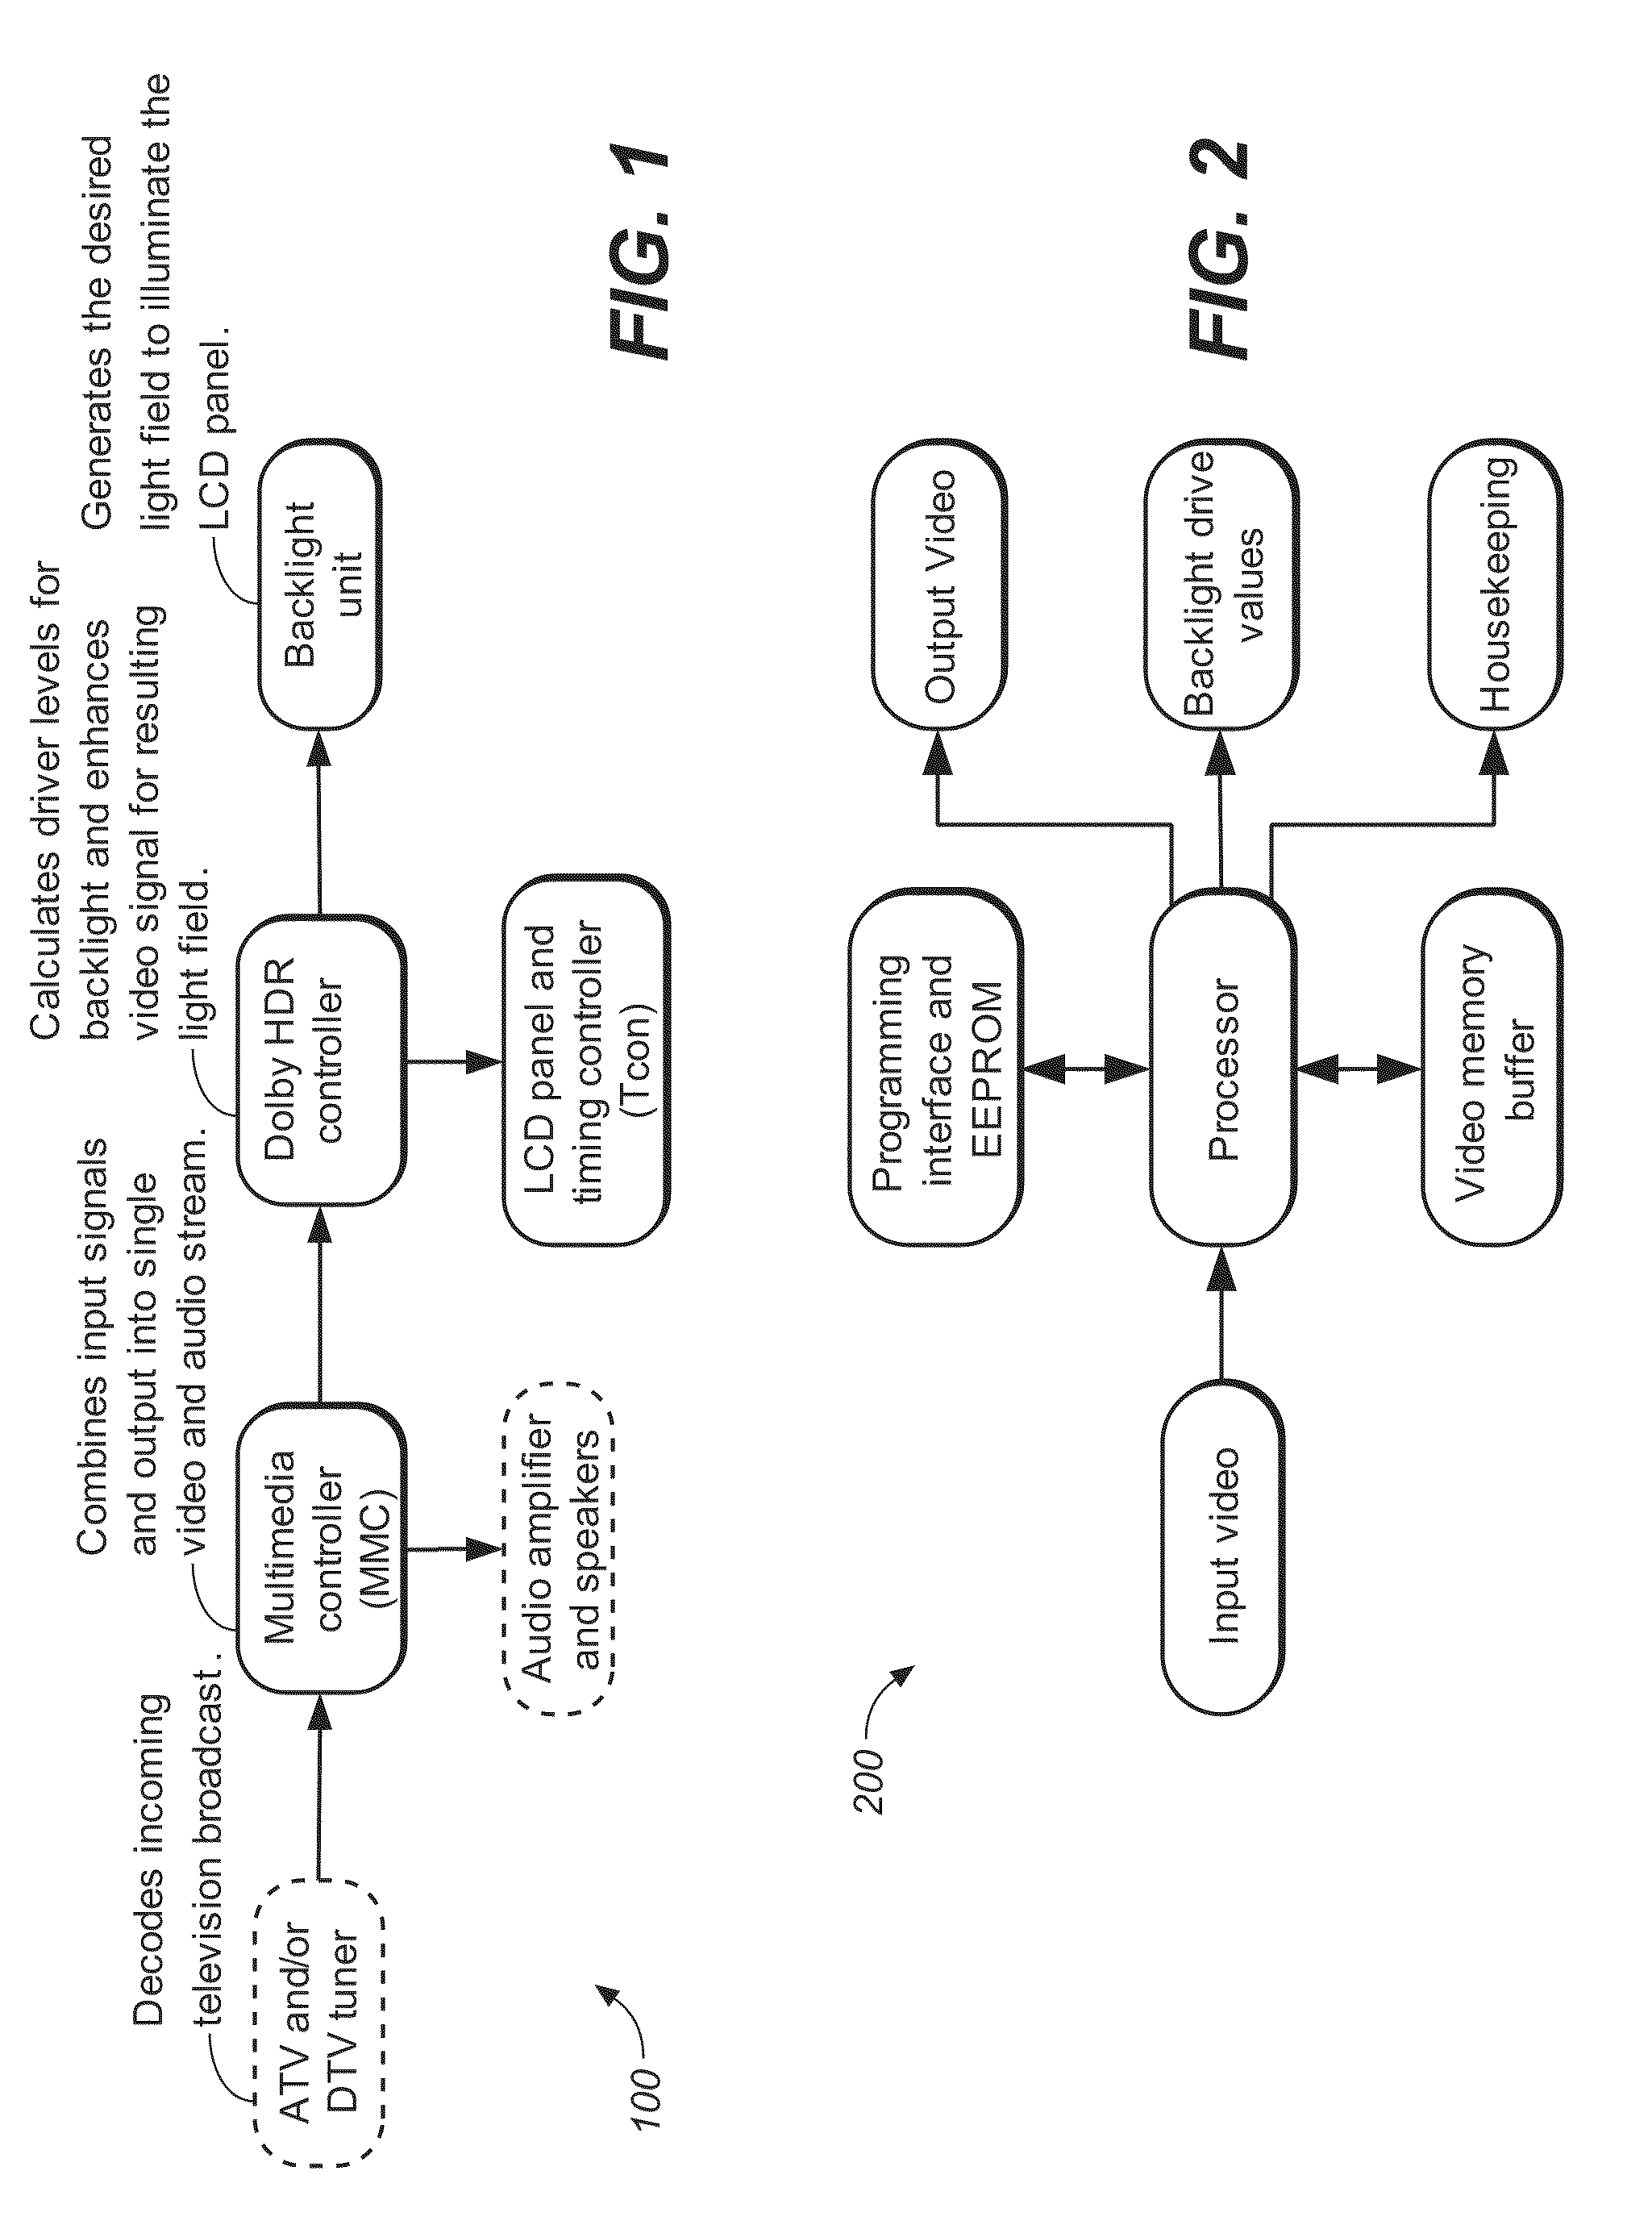 Method and apparatus in various embodiments for hdr implementation in display devices